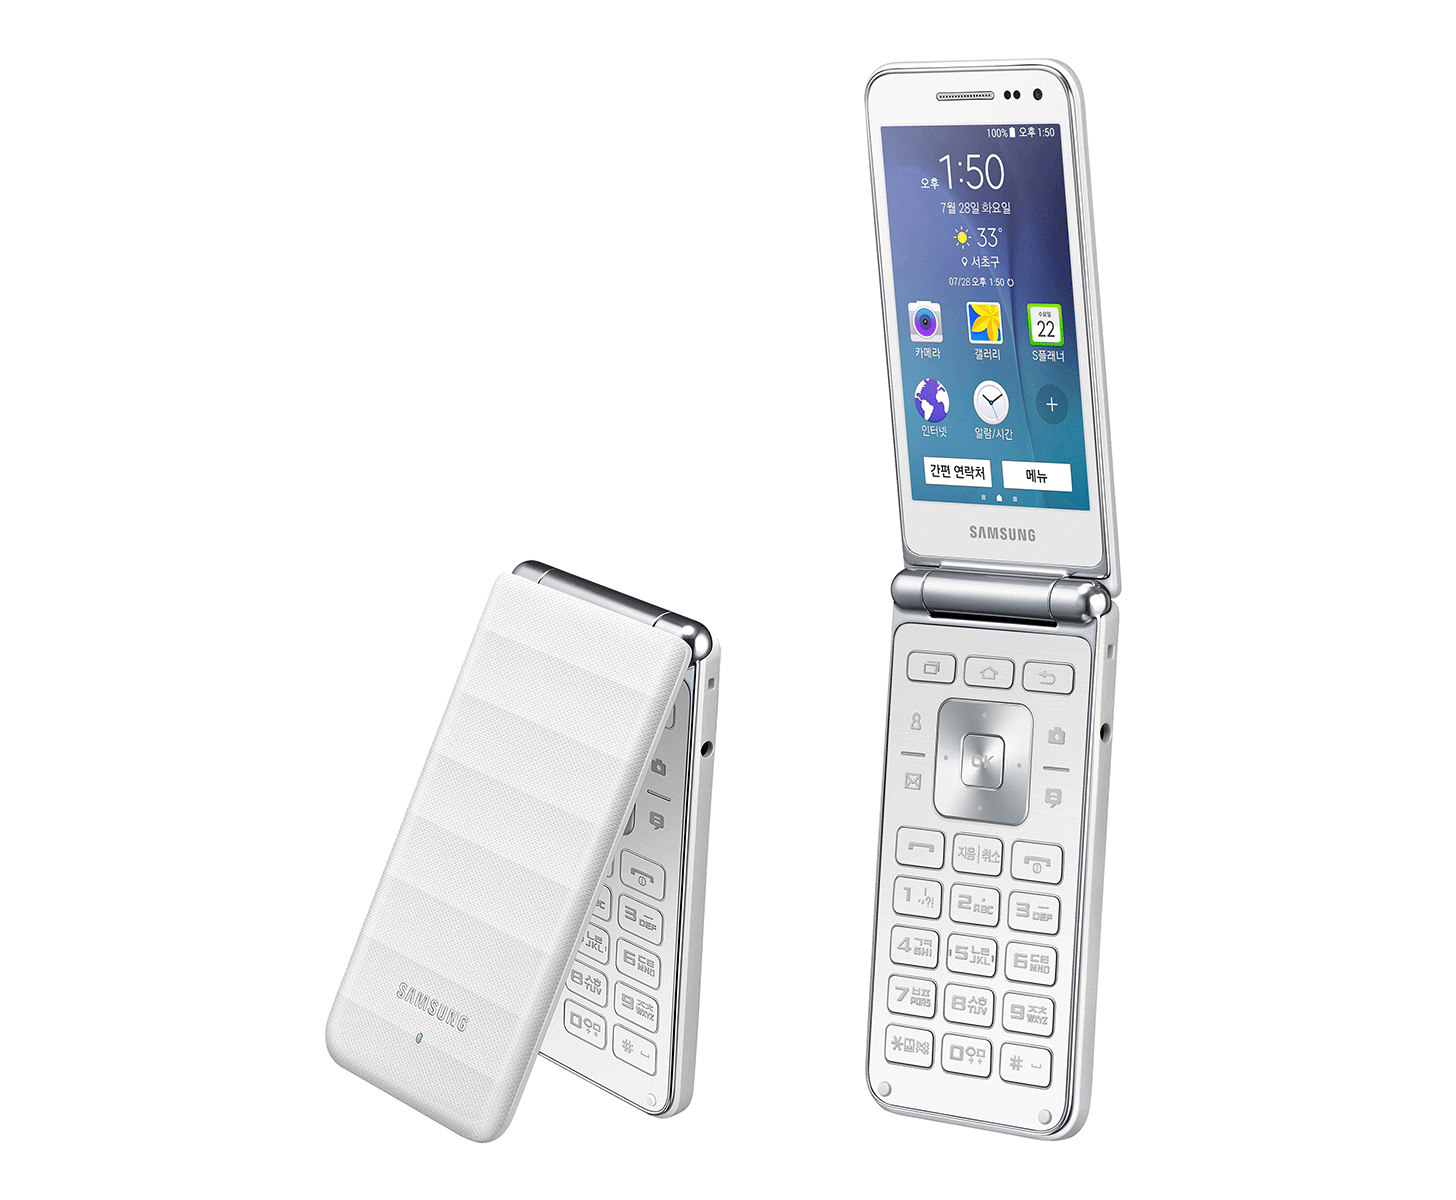 Samsung Galaxy Folder is the latest Android flip phone News.Wirefly